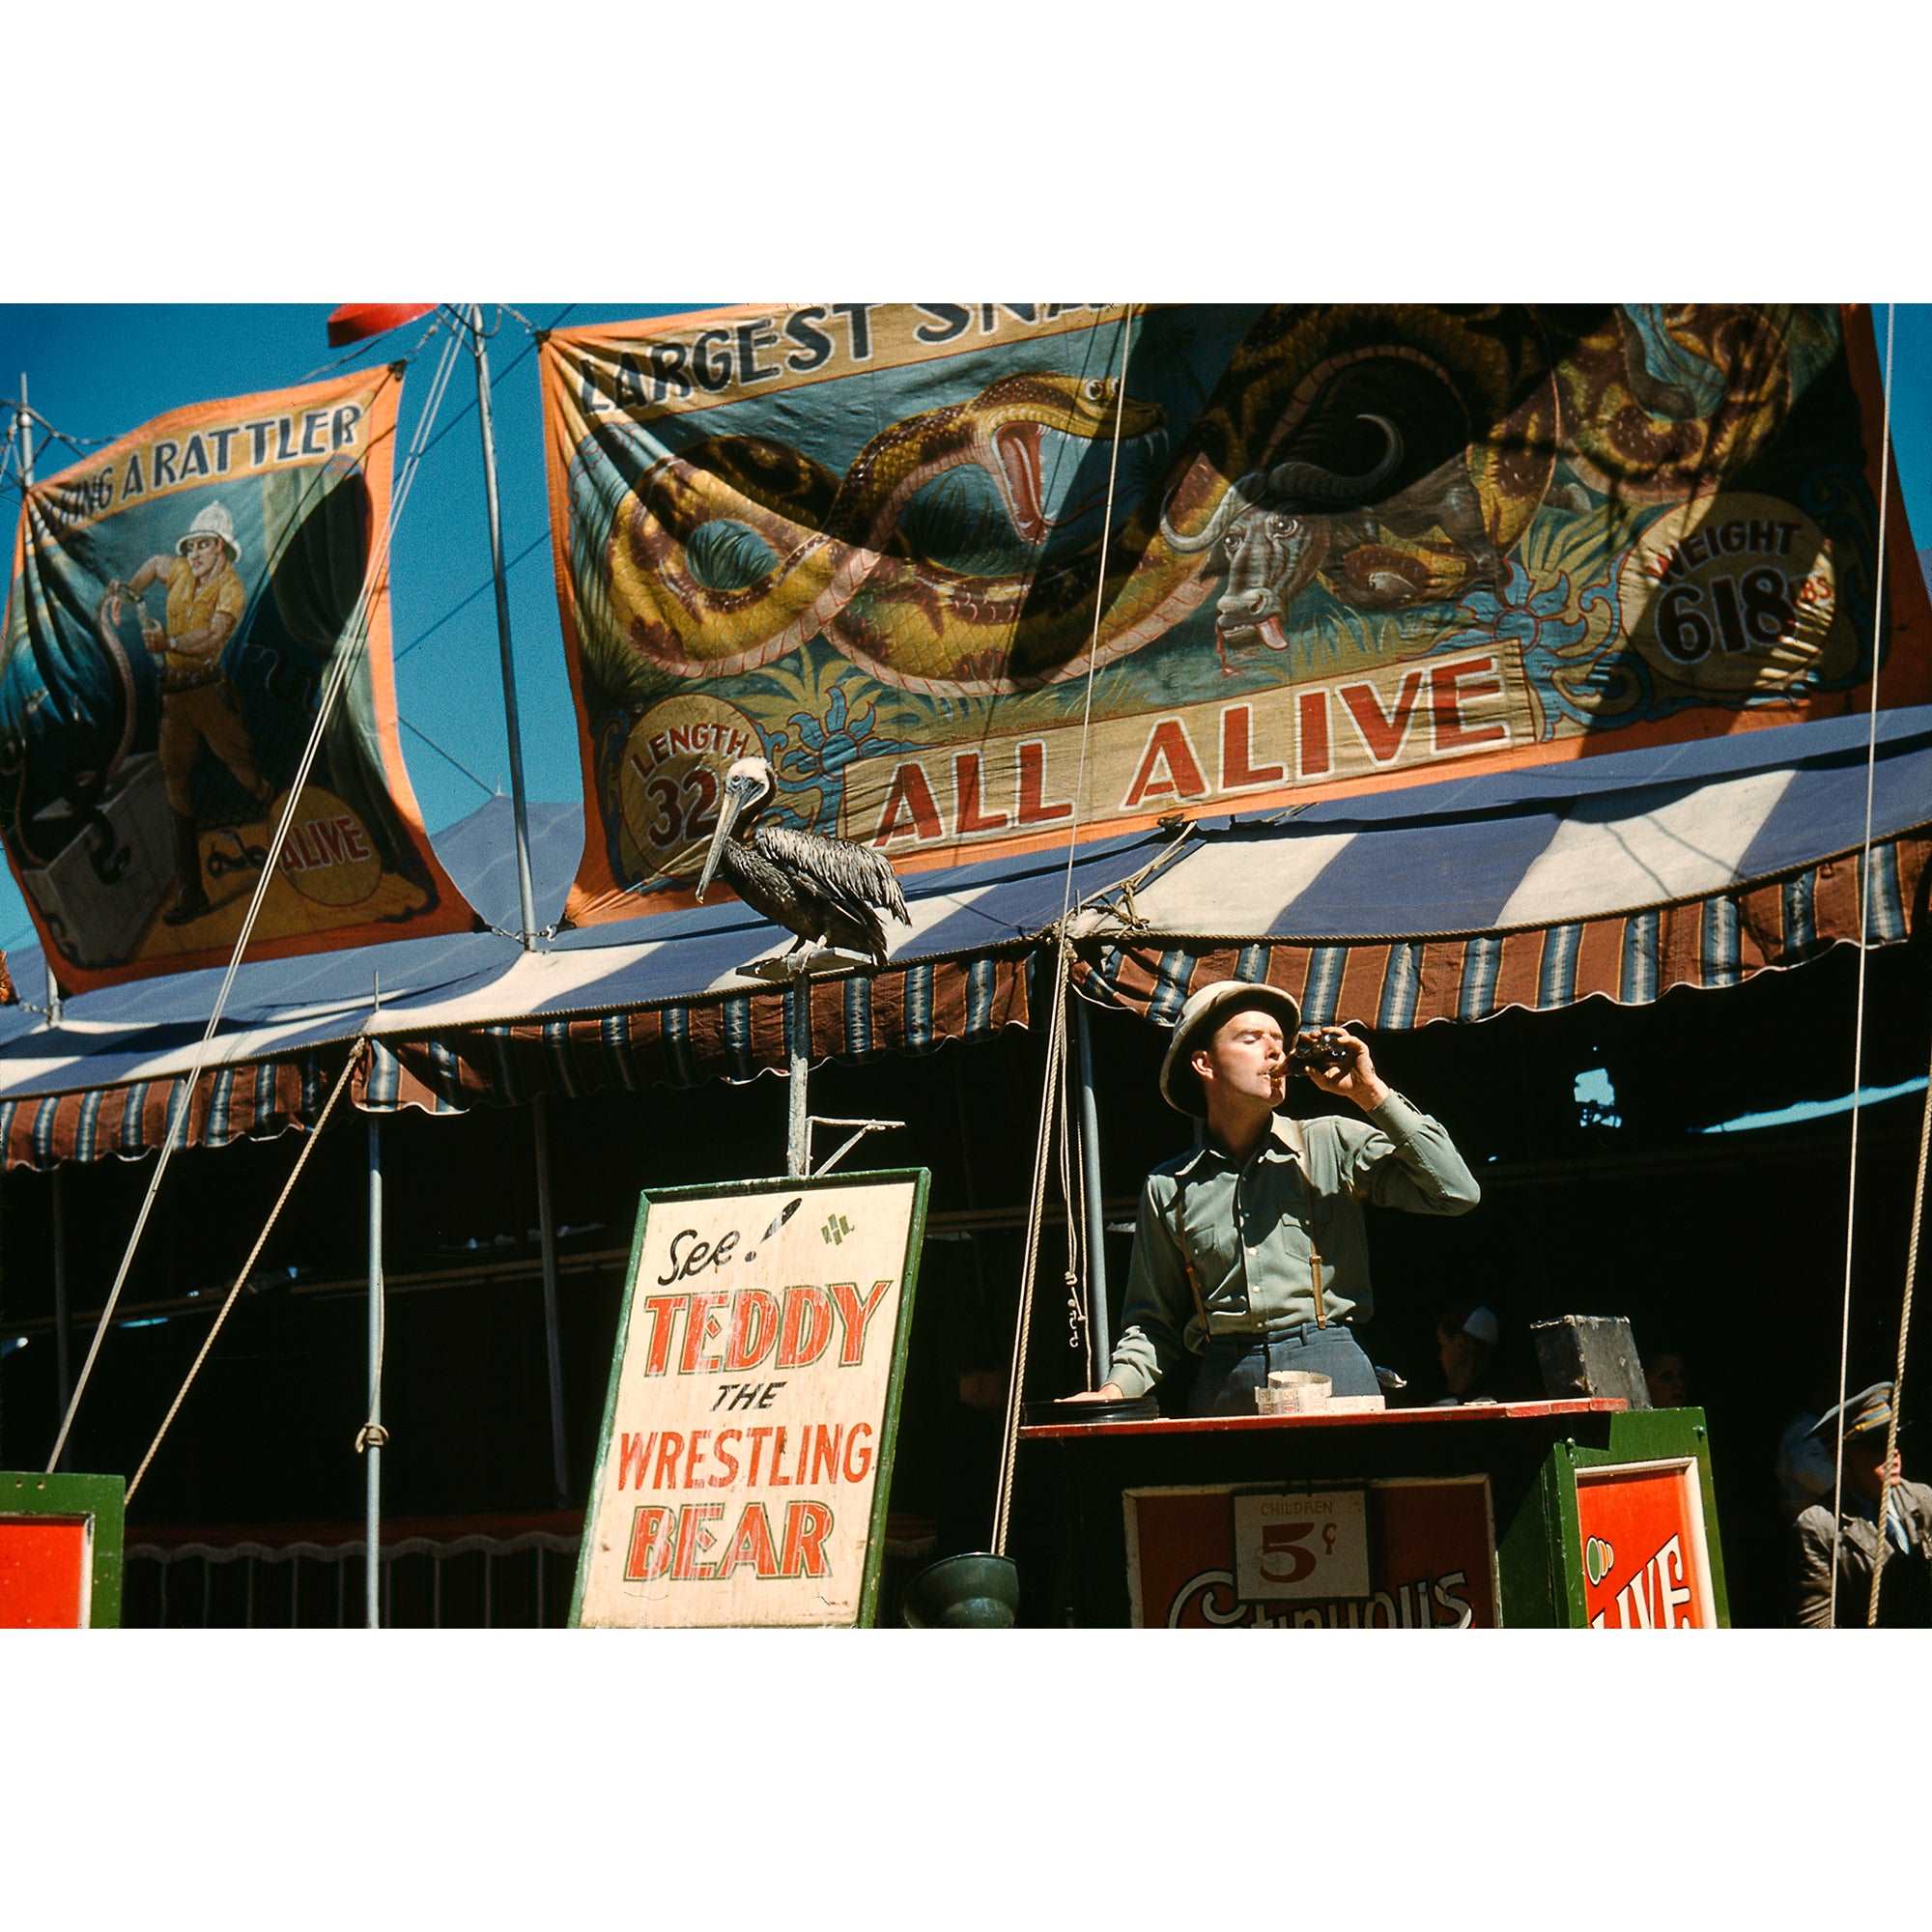 A full color vintage photograph featuring a barker in front of advertisements at the Vermont State Fair